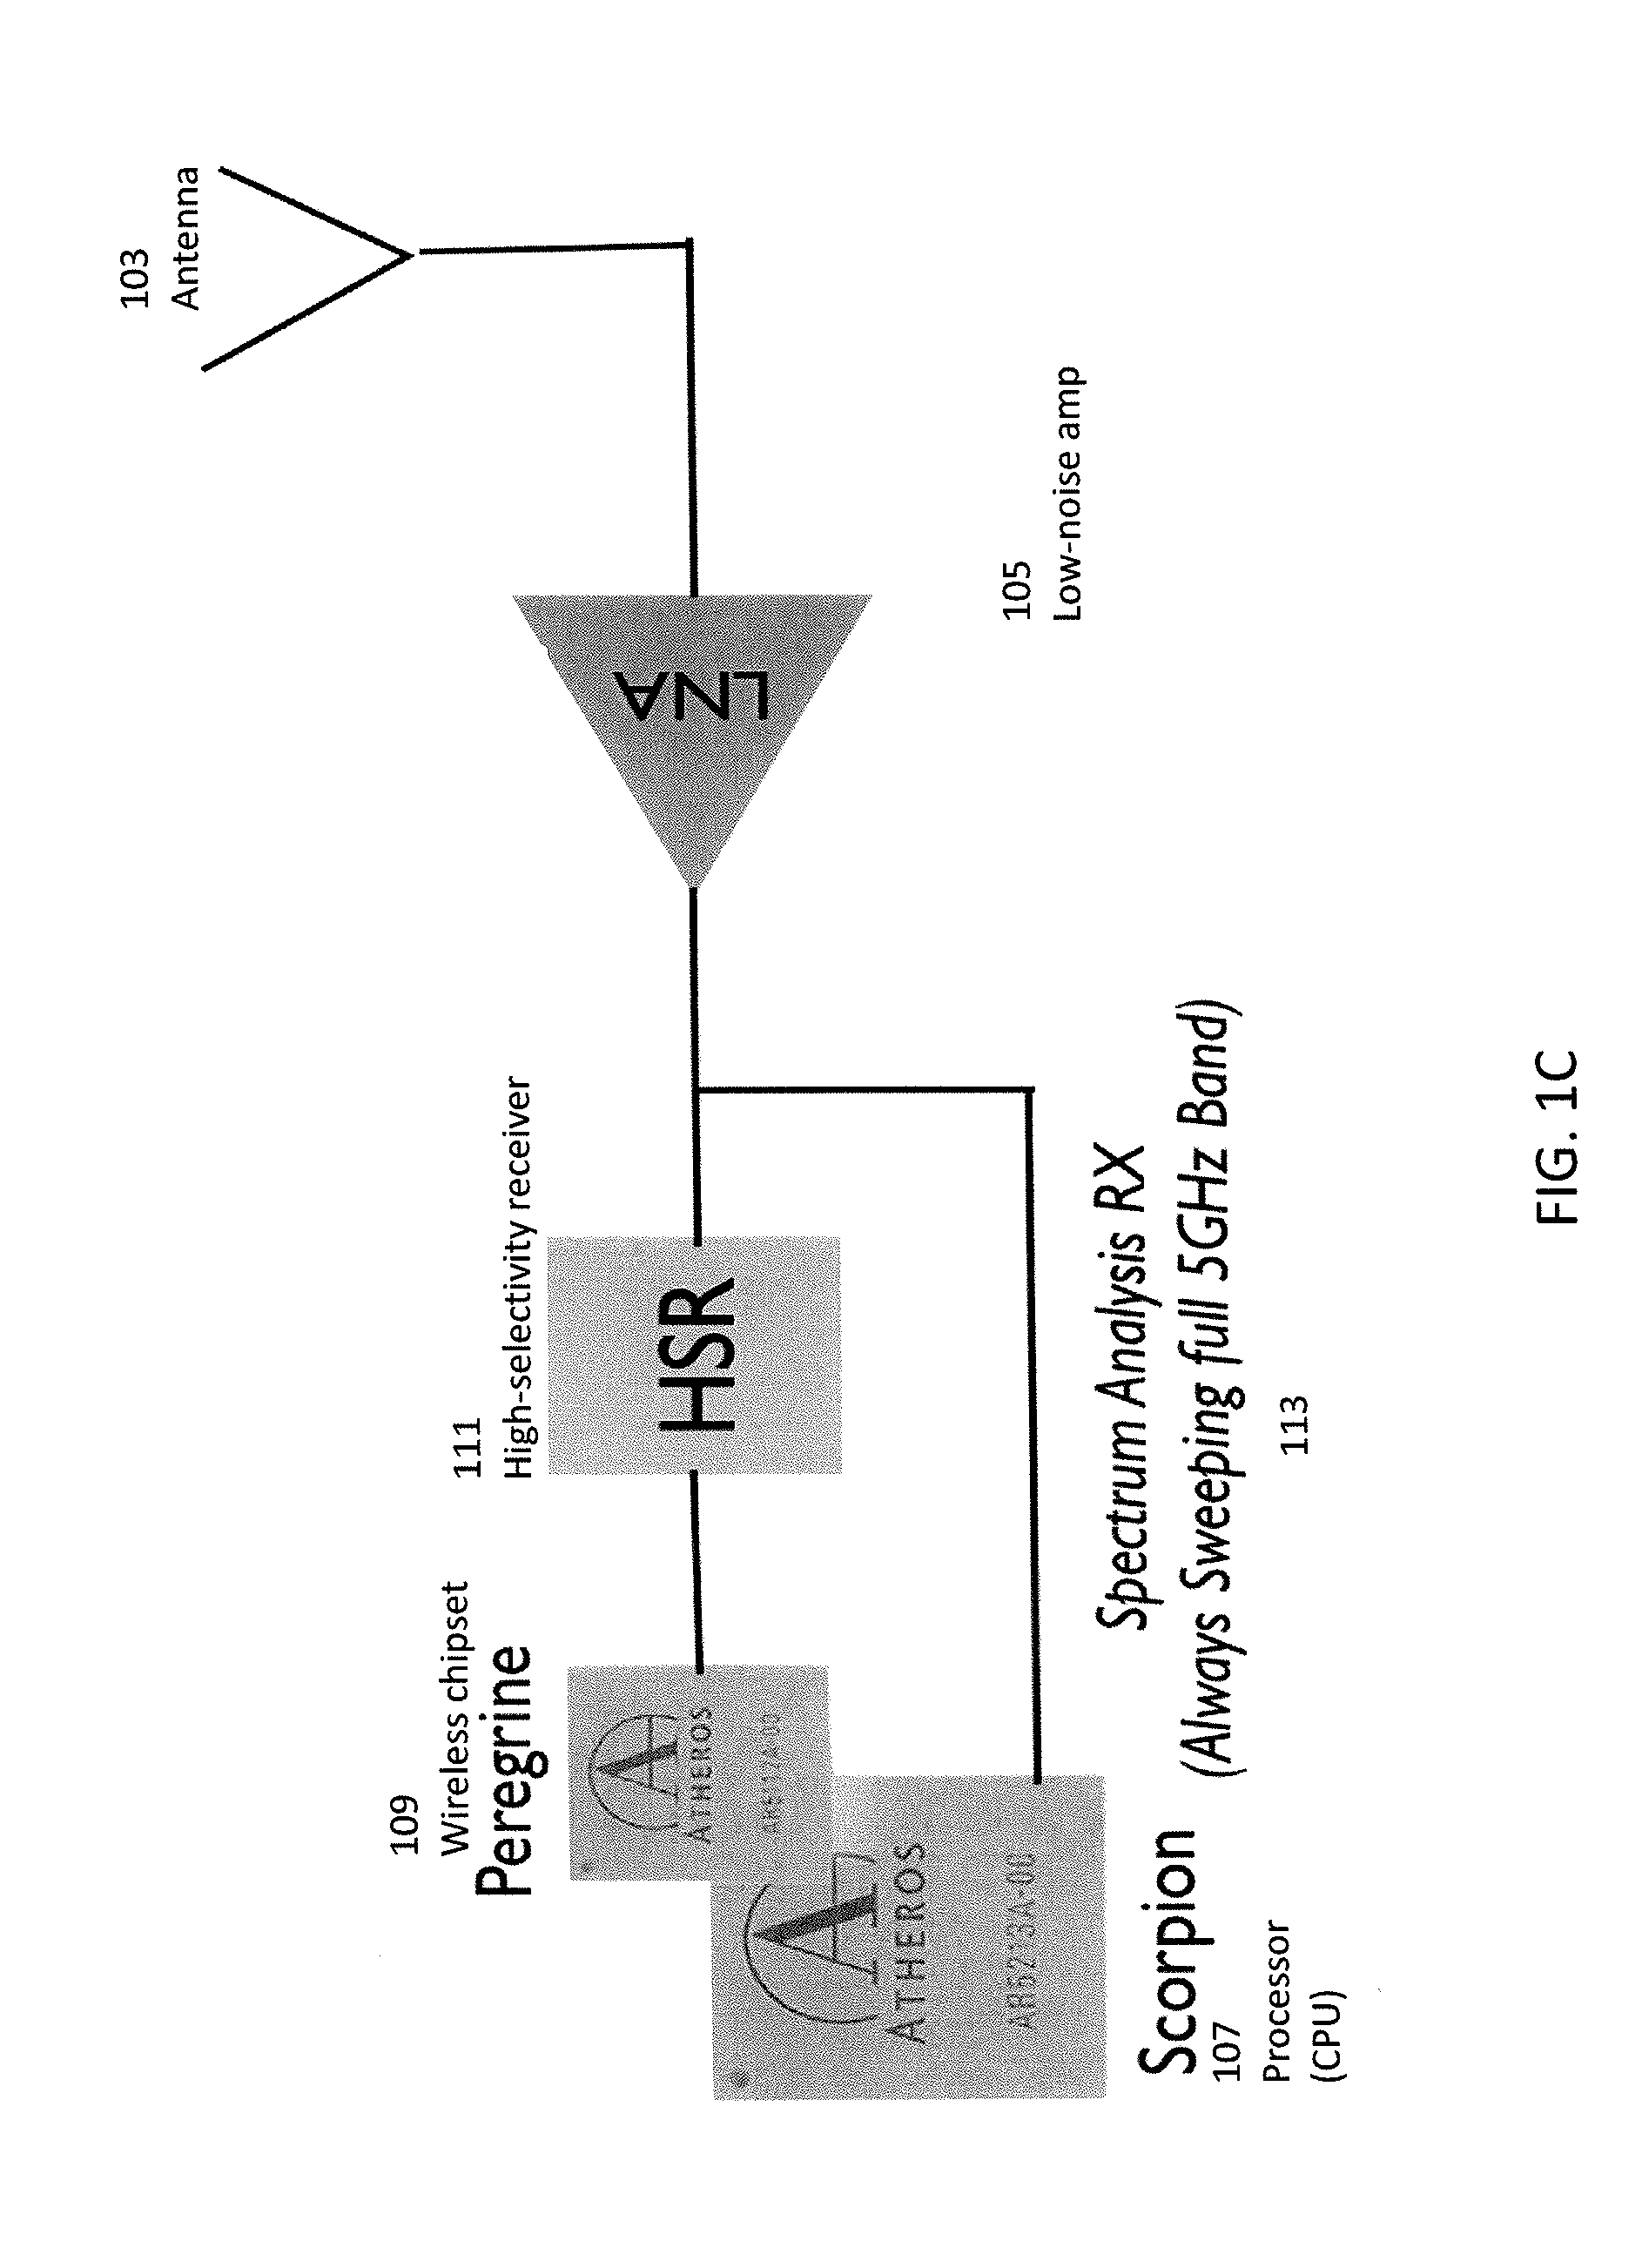 Methods and tools for persistent spectrum analysis of an operating radio frequency band